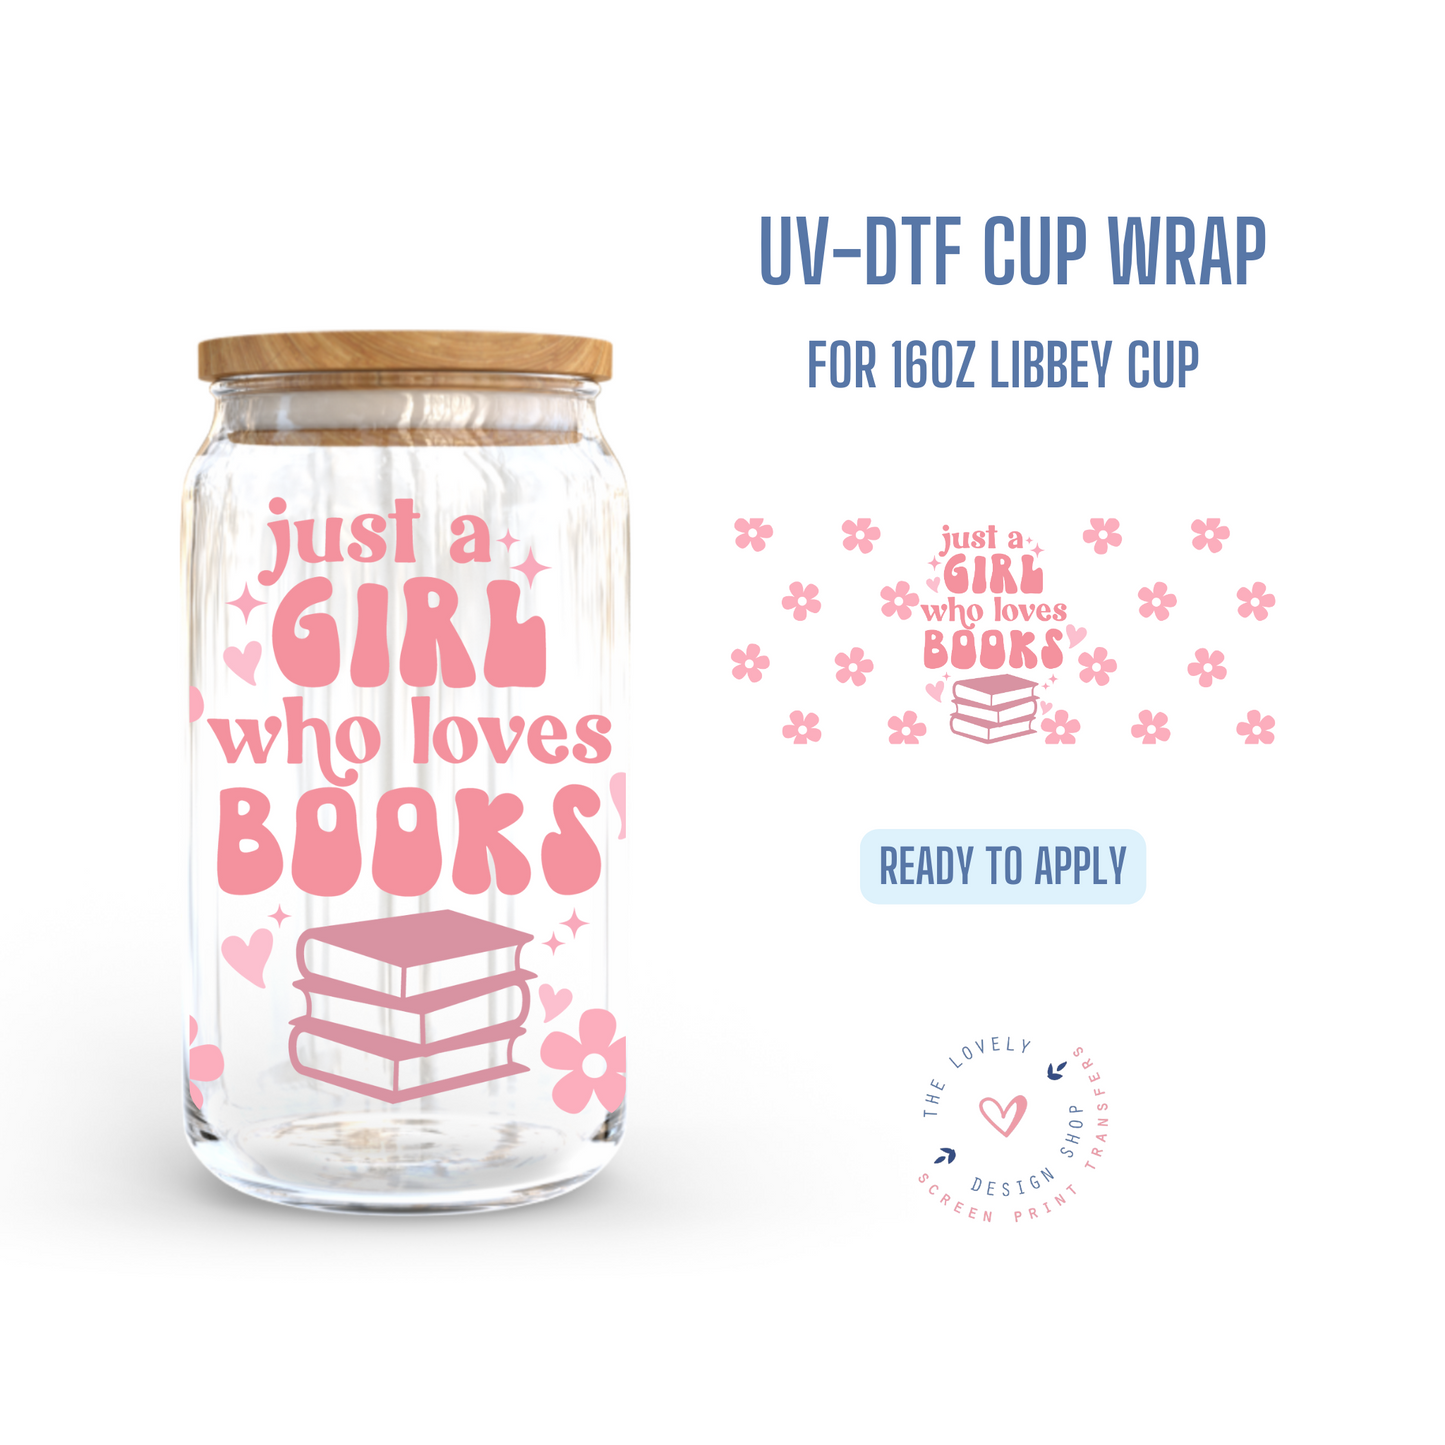 Girl who loves Books - UV DTF 16 oz Libbey Cup Wrap (Ready to Ship)